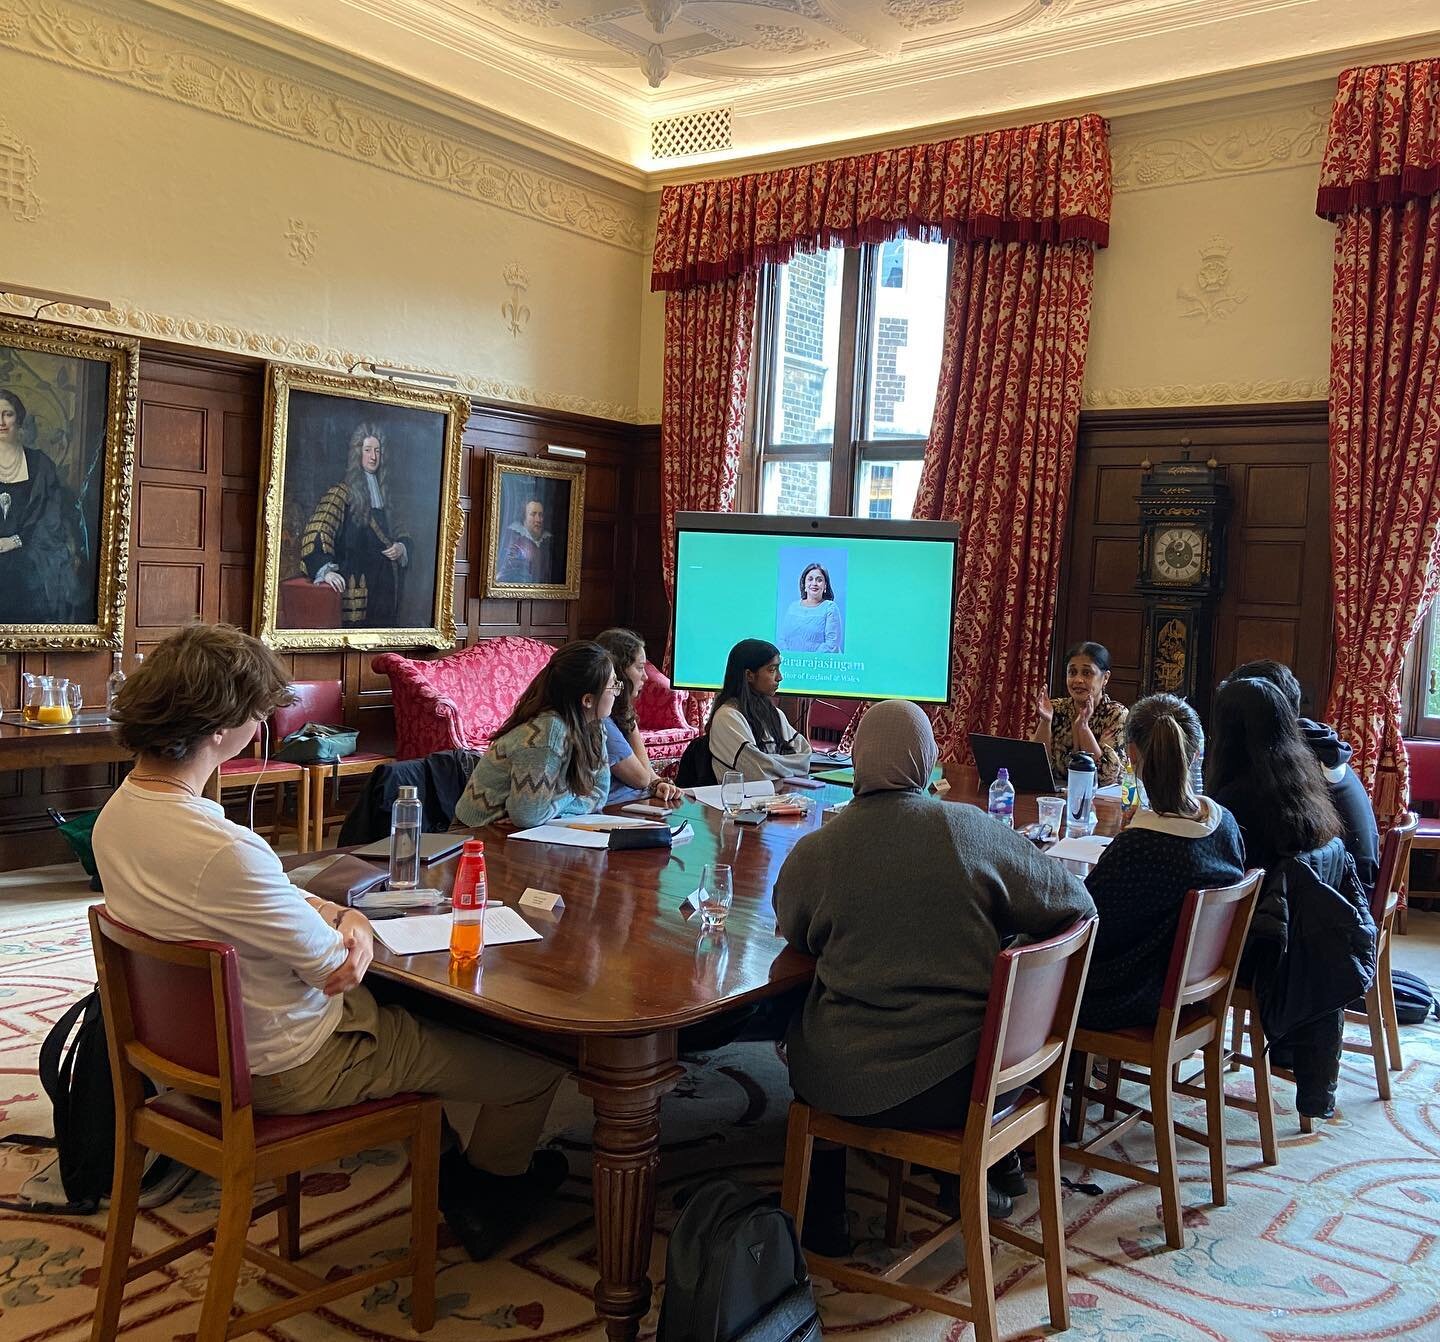 Meet the solicitor! 

Excited to have Sashi Pararajasingam, a Senior Solicitor of England and Wales who gave an insightful talk on all things Immigration and Housing Law! 
.
.
.
.
.
#solicitor #immigration #knowledge #housing #careers #careerpath #as